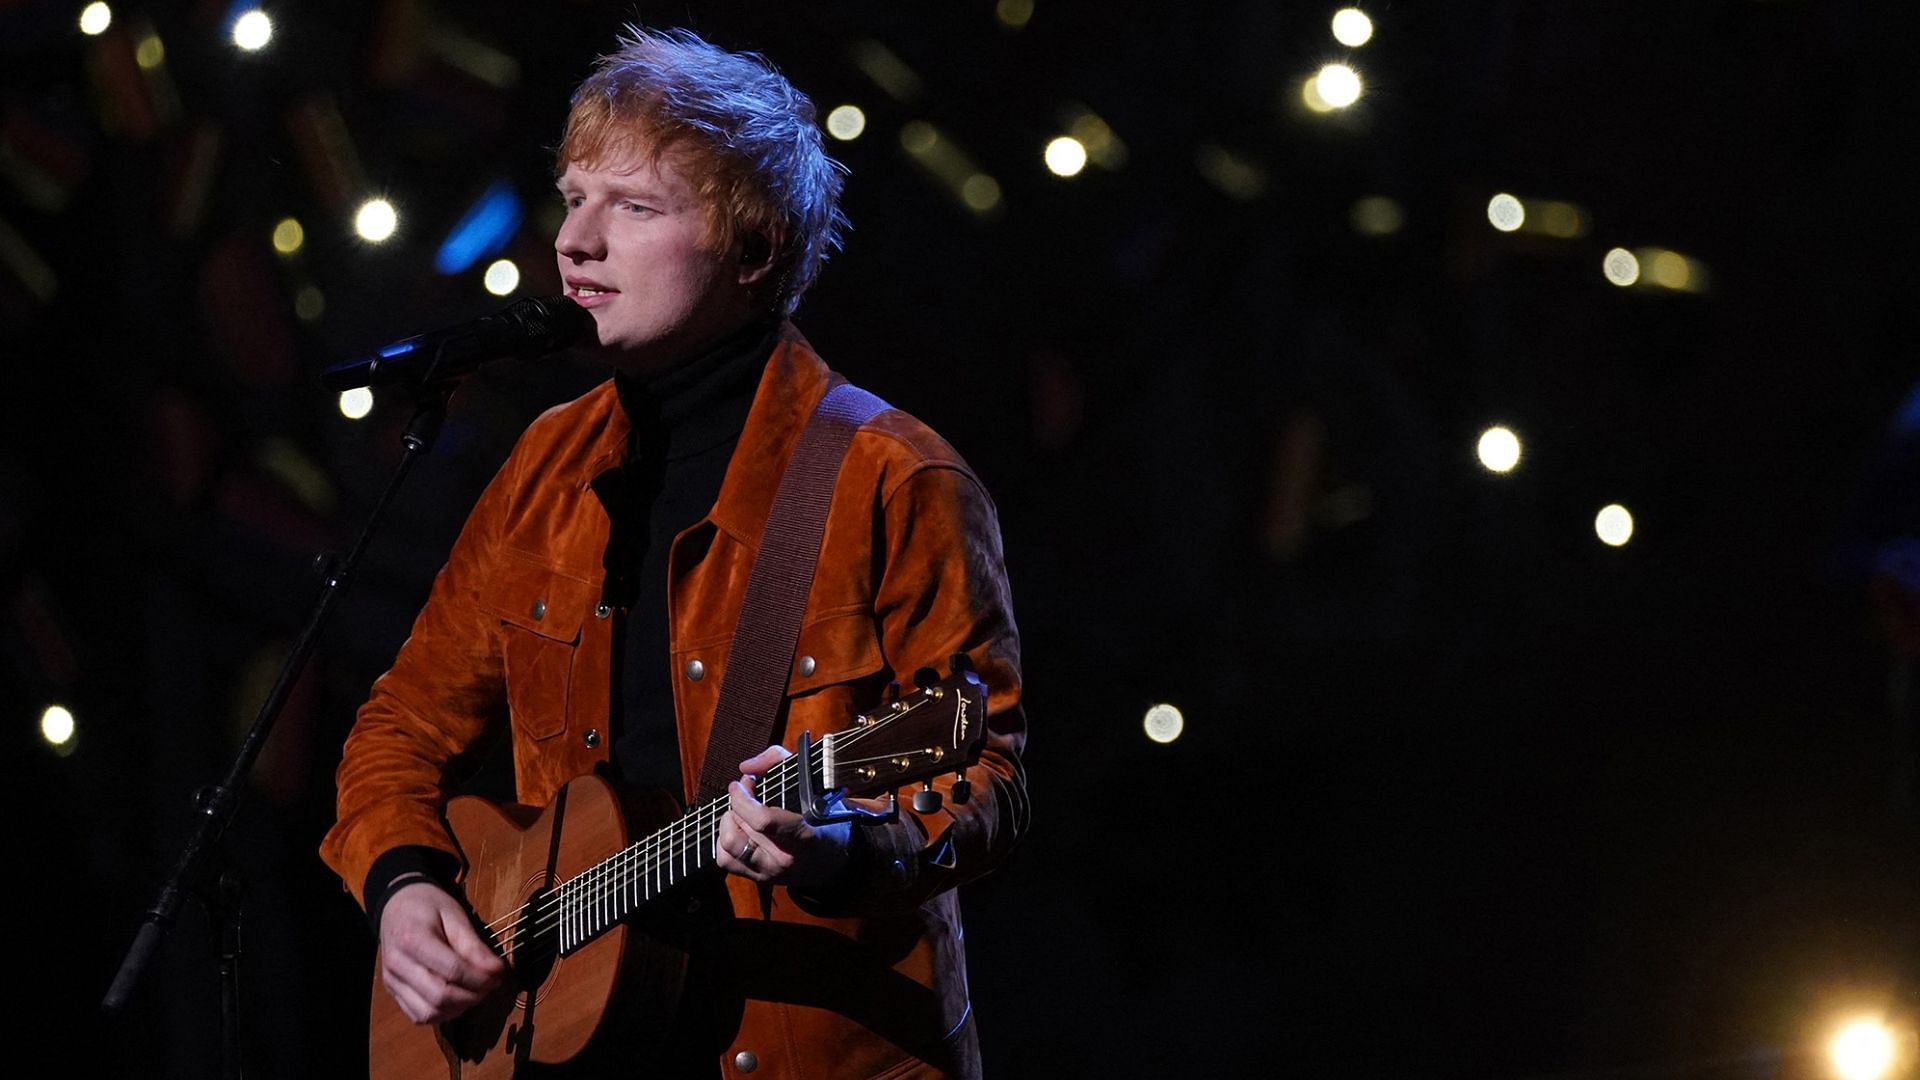 Ed Sheeran has announced additional tour dates for 2023. (Image via Getty)